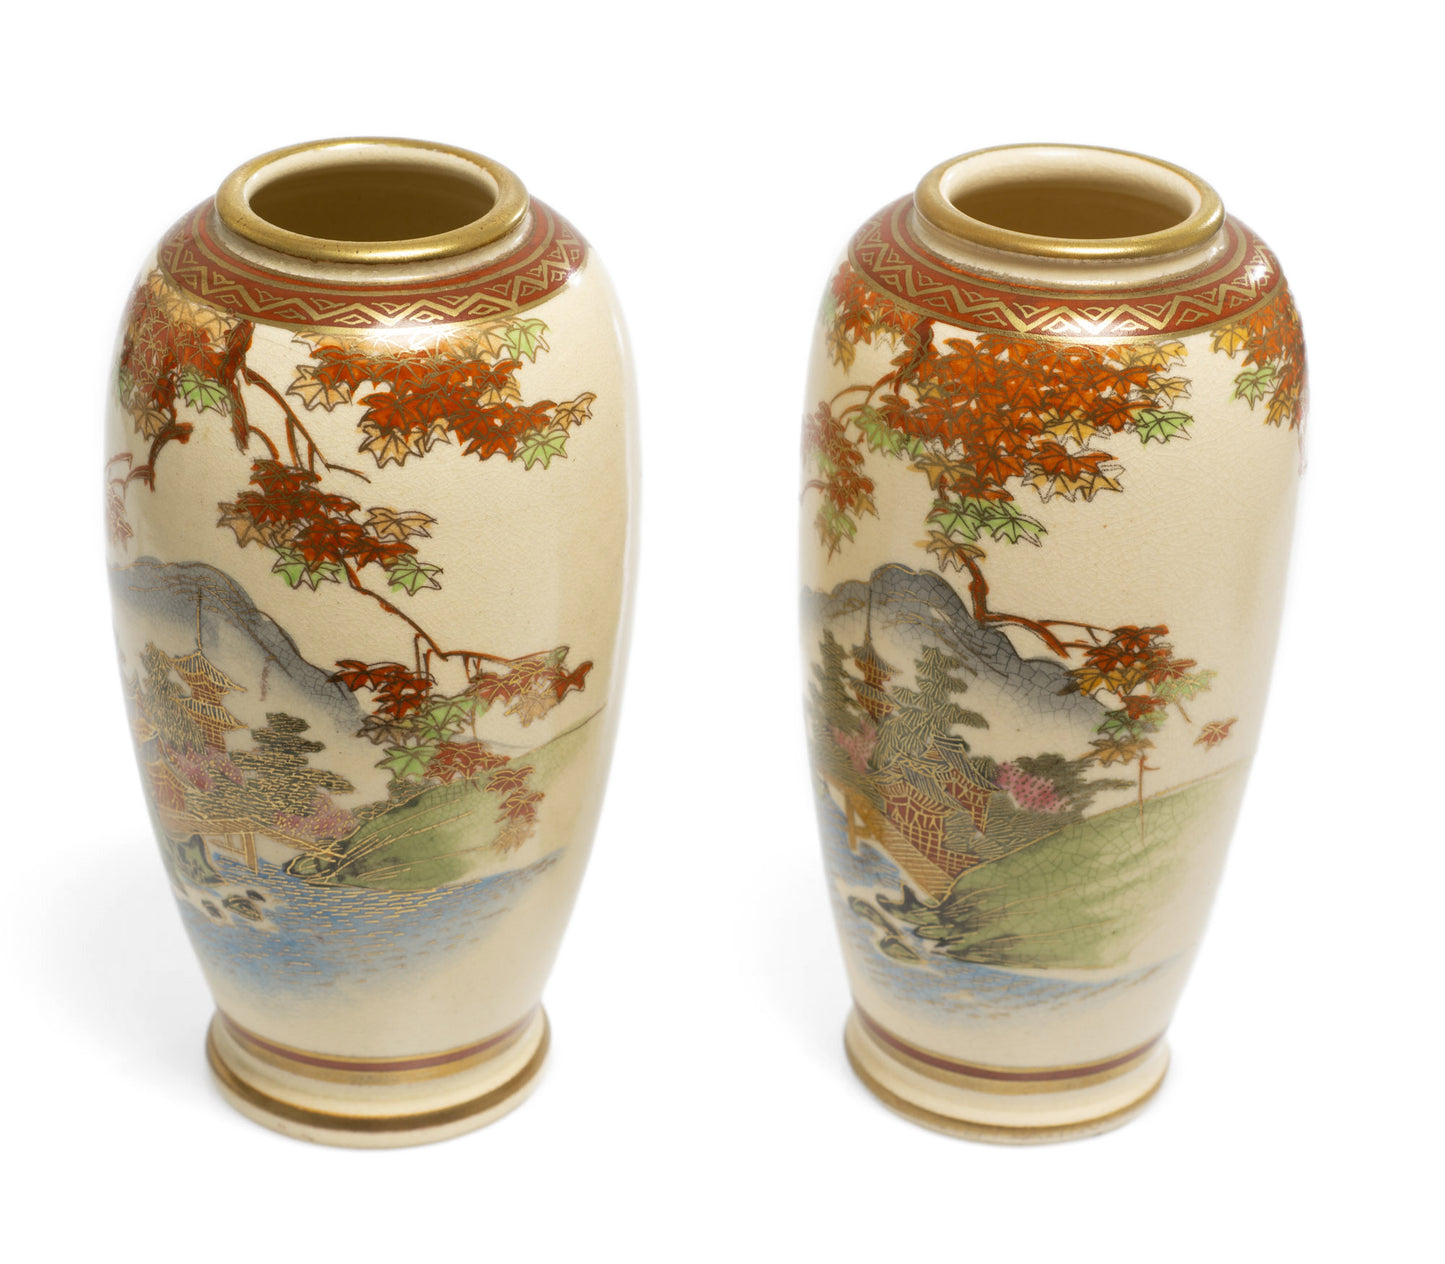 Pair Antique Japanese Satsuma Ware Vases Decorated by the Bizan Workshop (Code 2645)